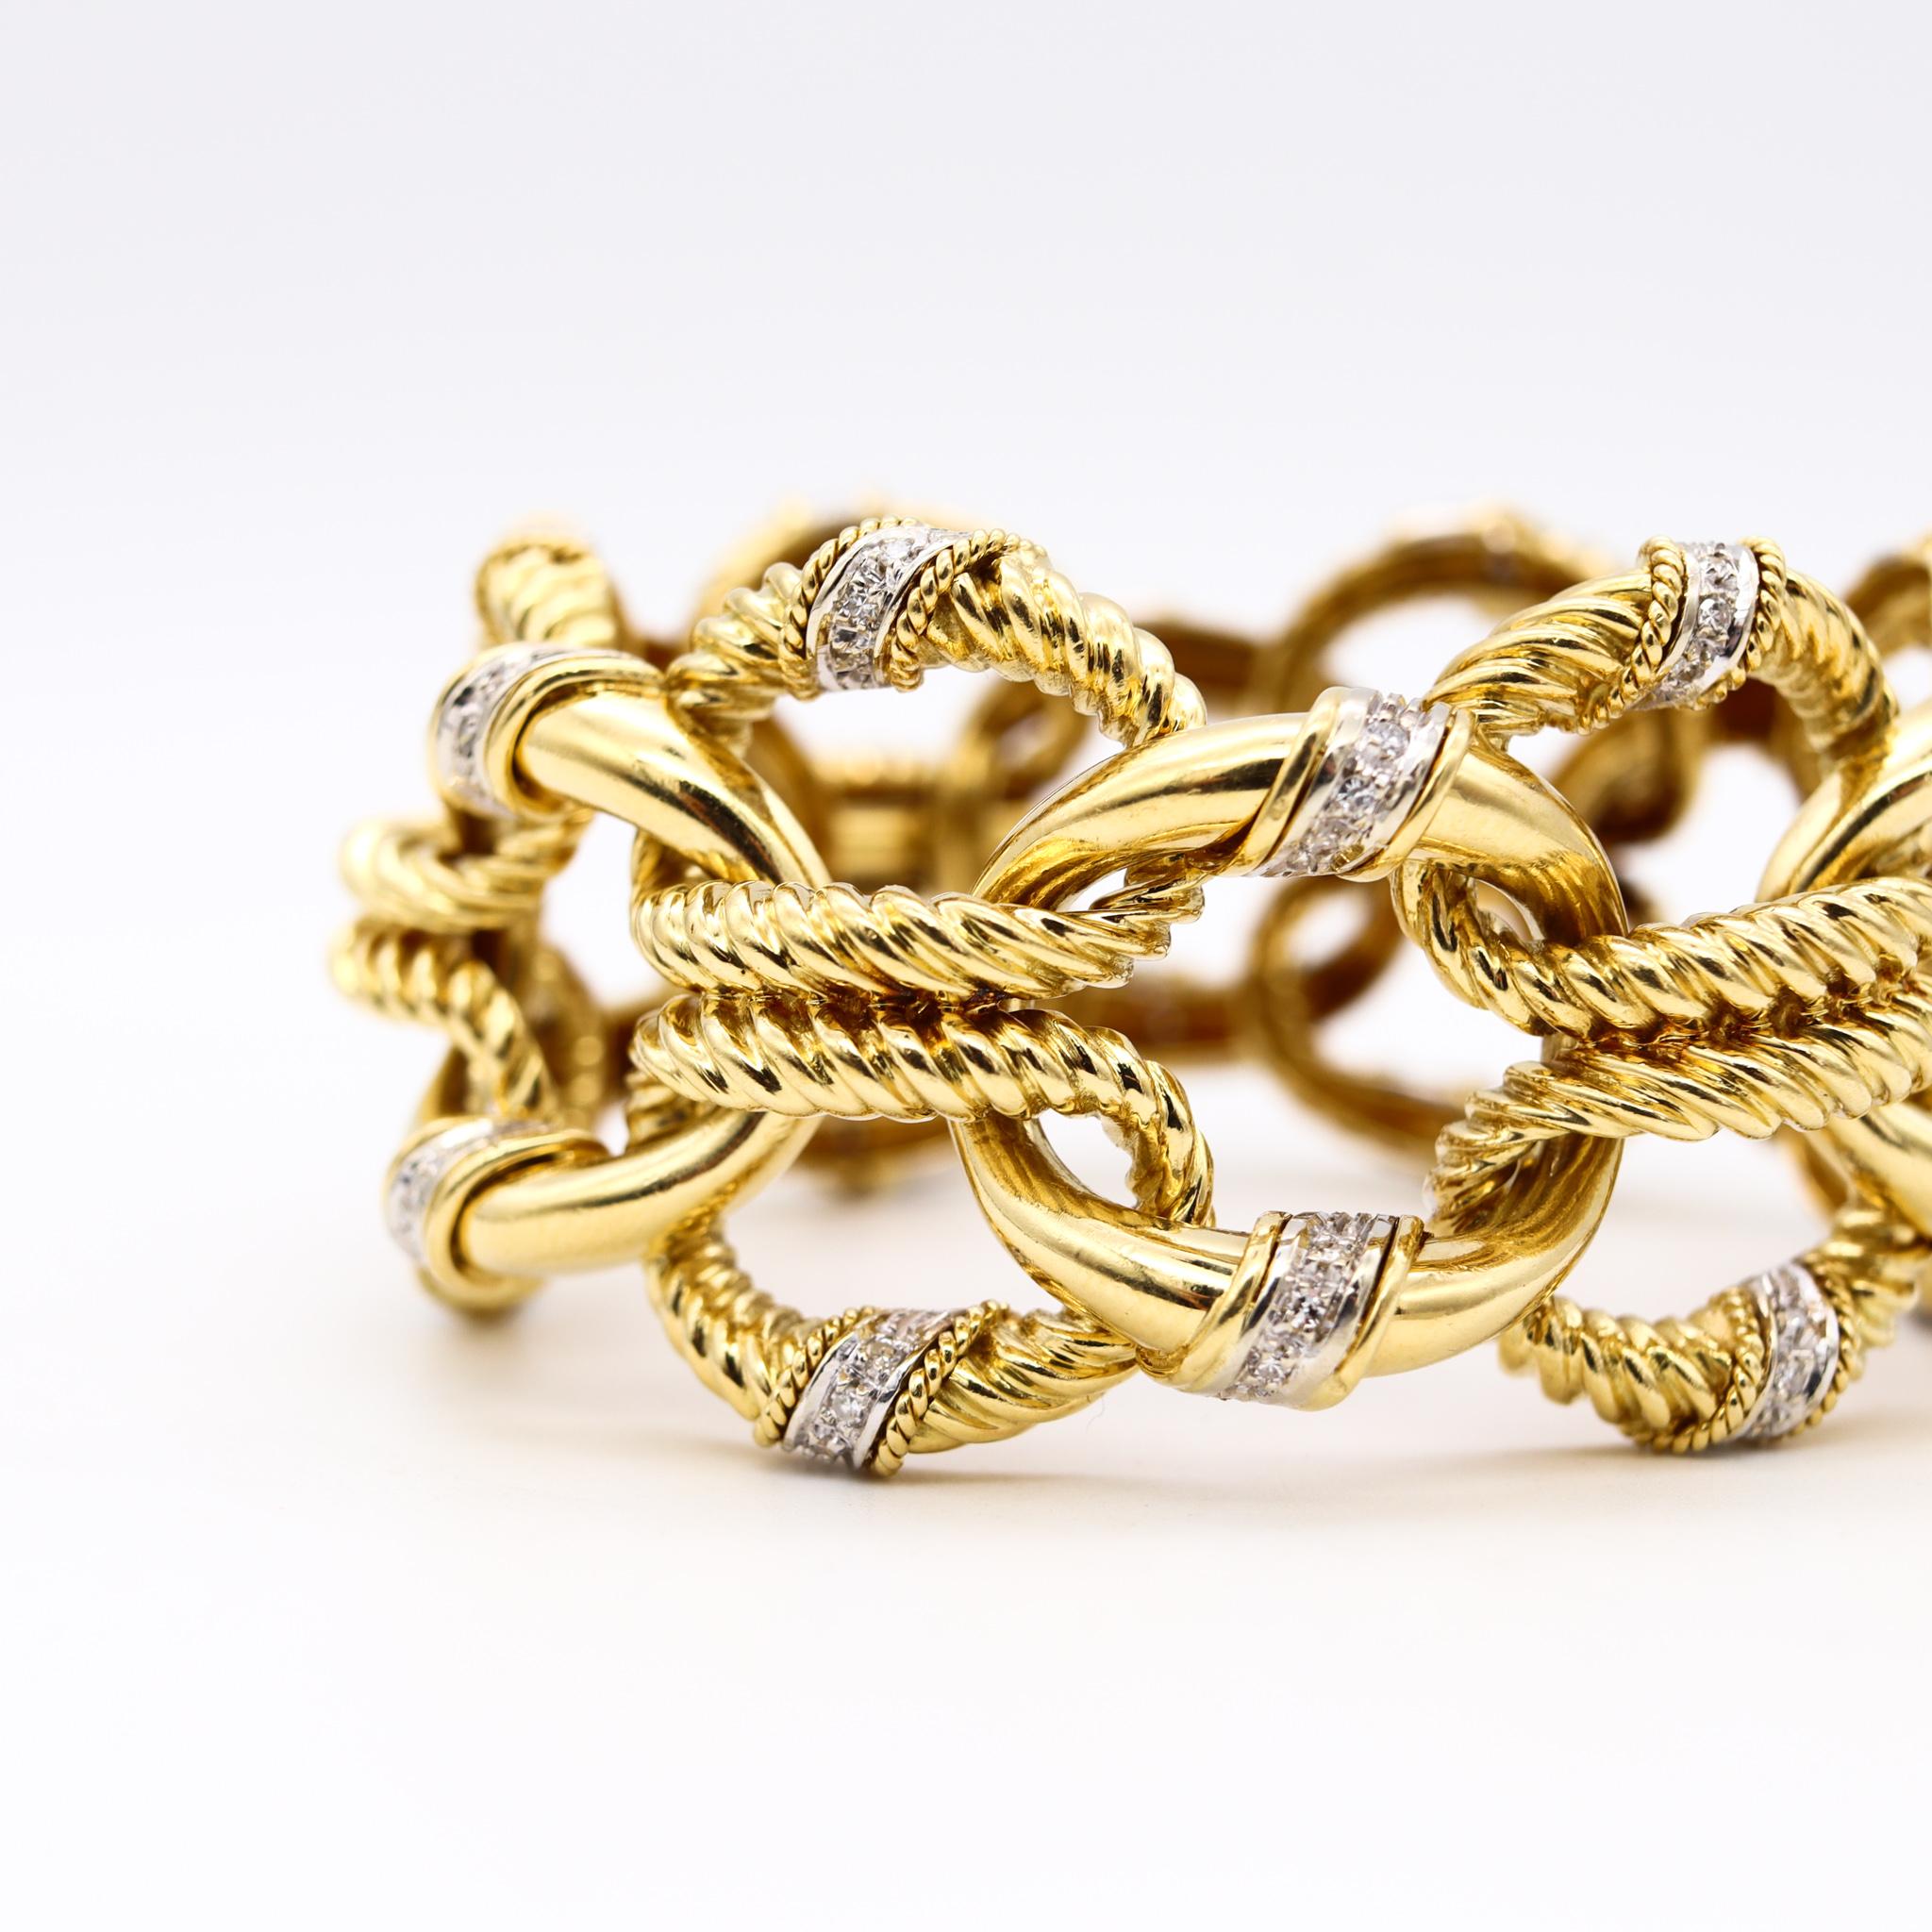 Rope links bracelet designed by Van Cleef & Arpels.

Beautiful links bracelet, created for the house of Van Cleef & Arpels in New York city during the late mid-century period, circa 1960's. Designed as double rows of sculpted gold openwork